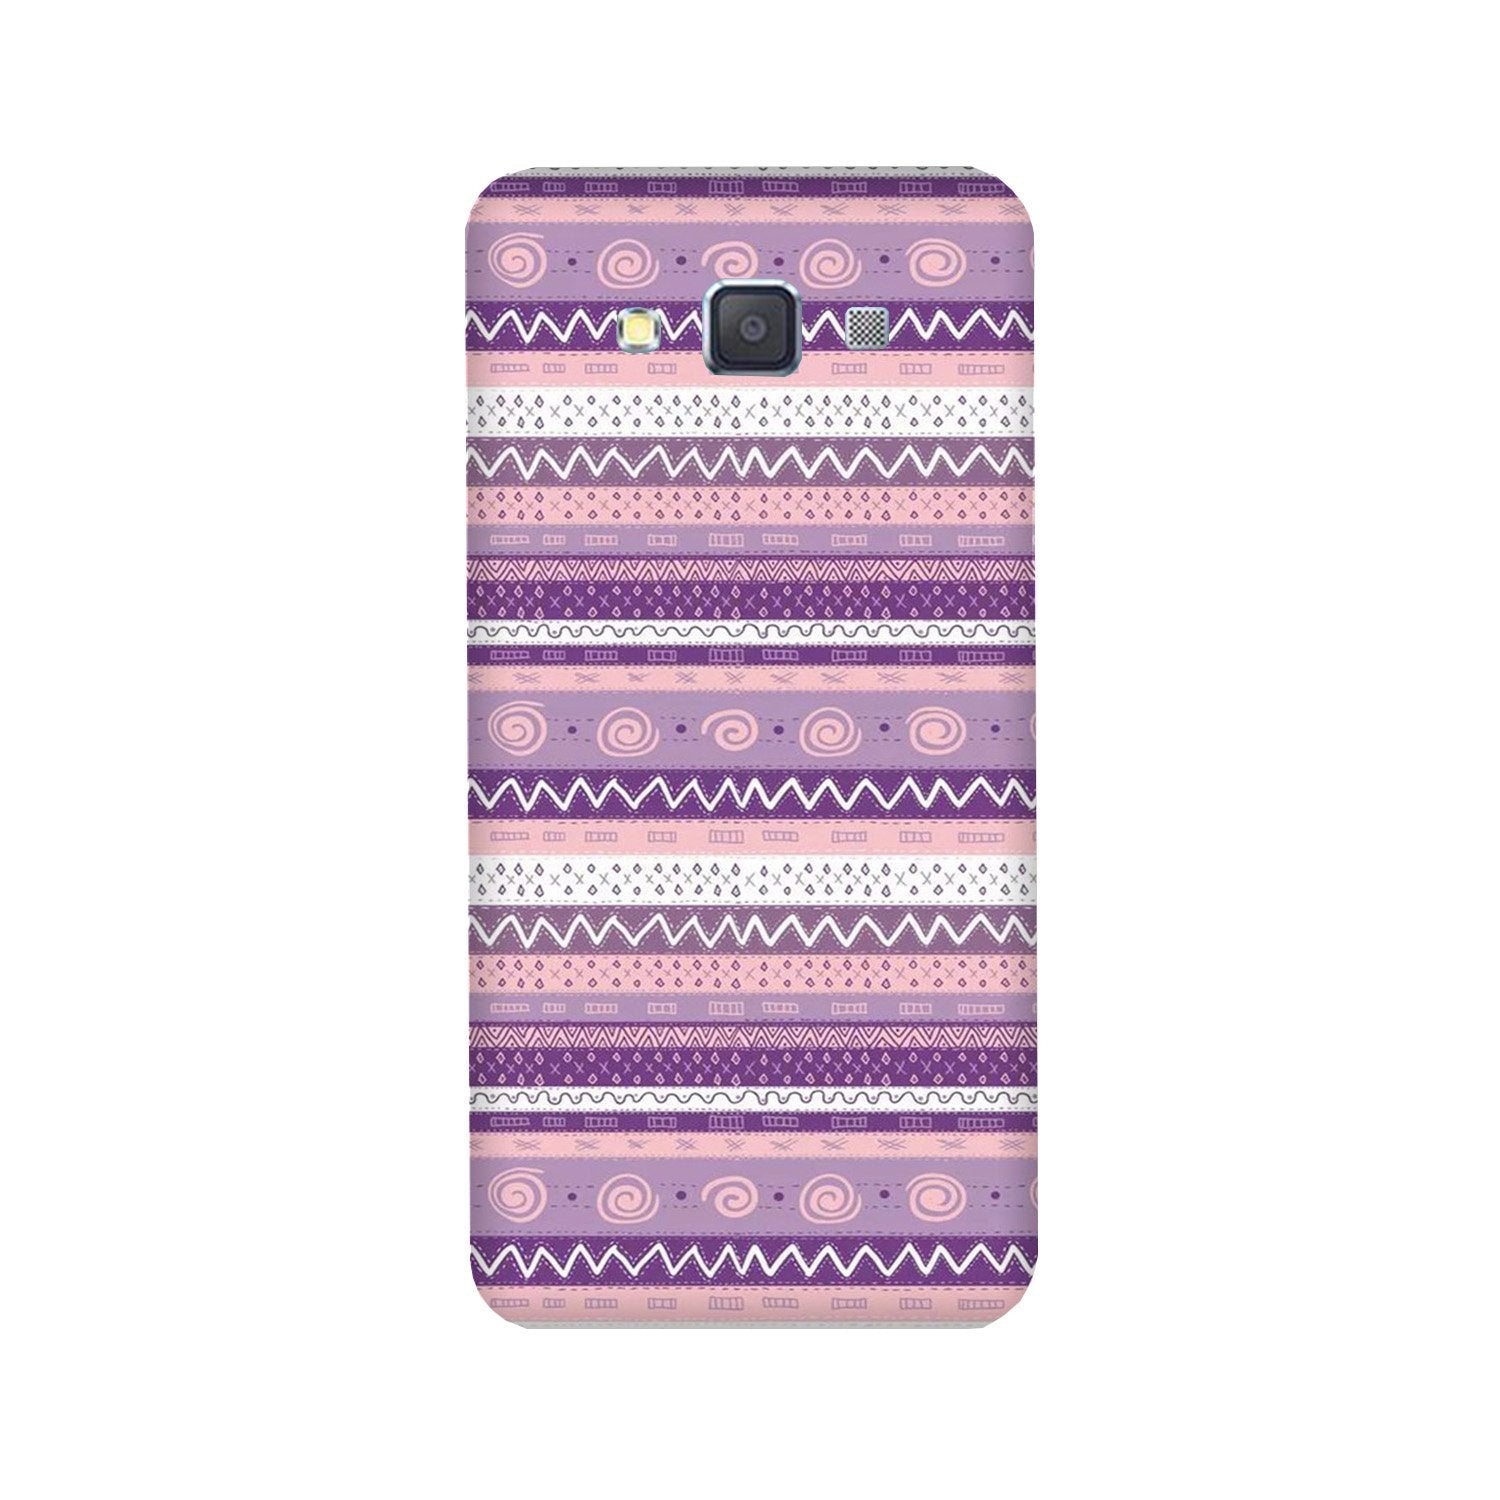 Zigzag line pattern3 Case for Galaxy Grand 2